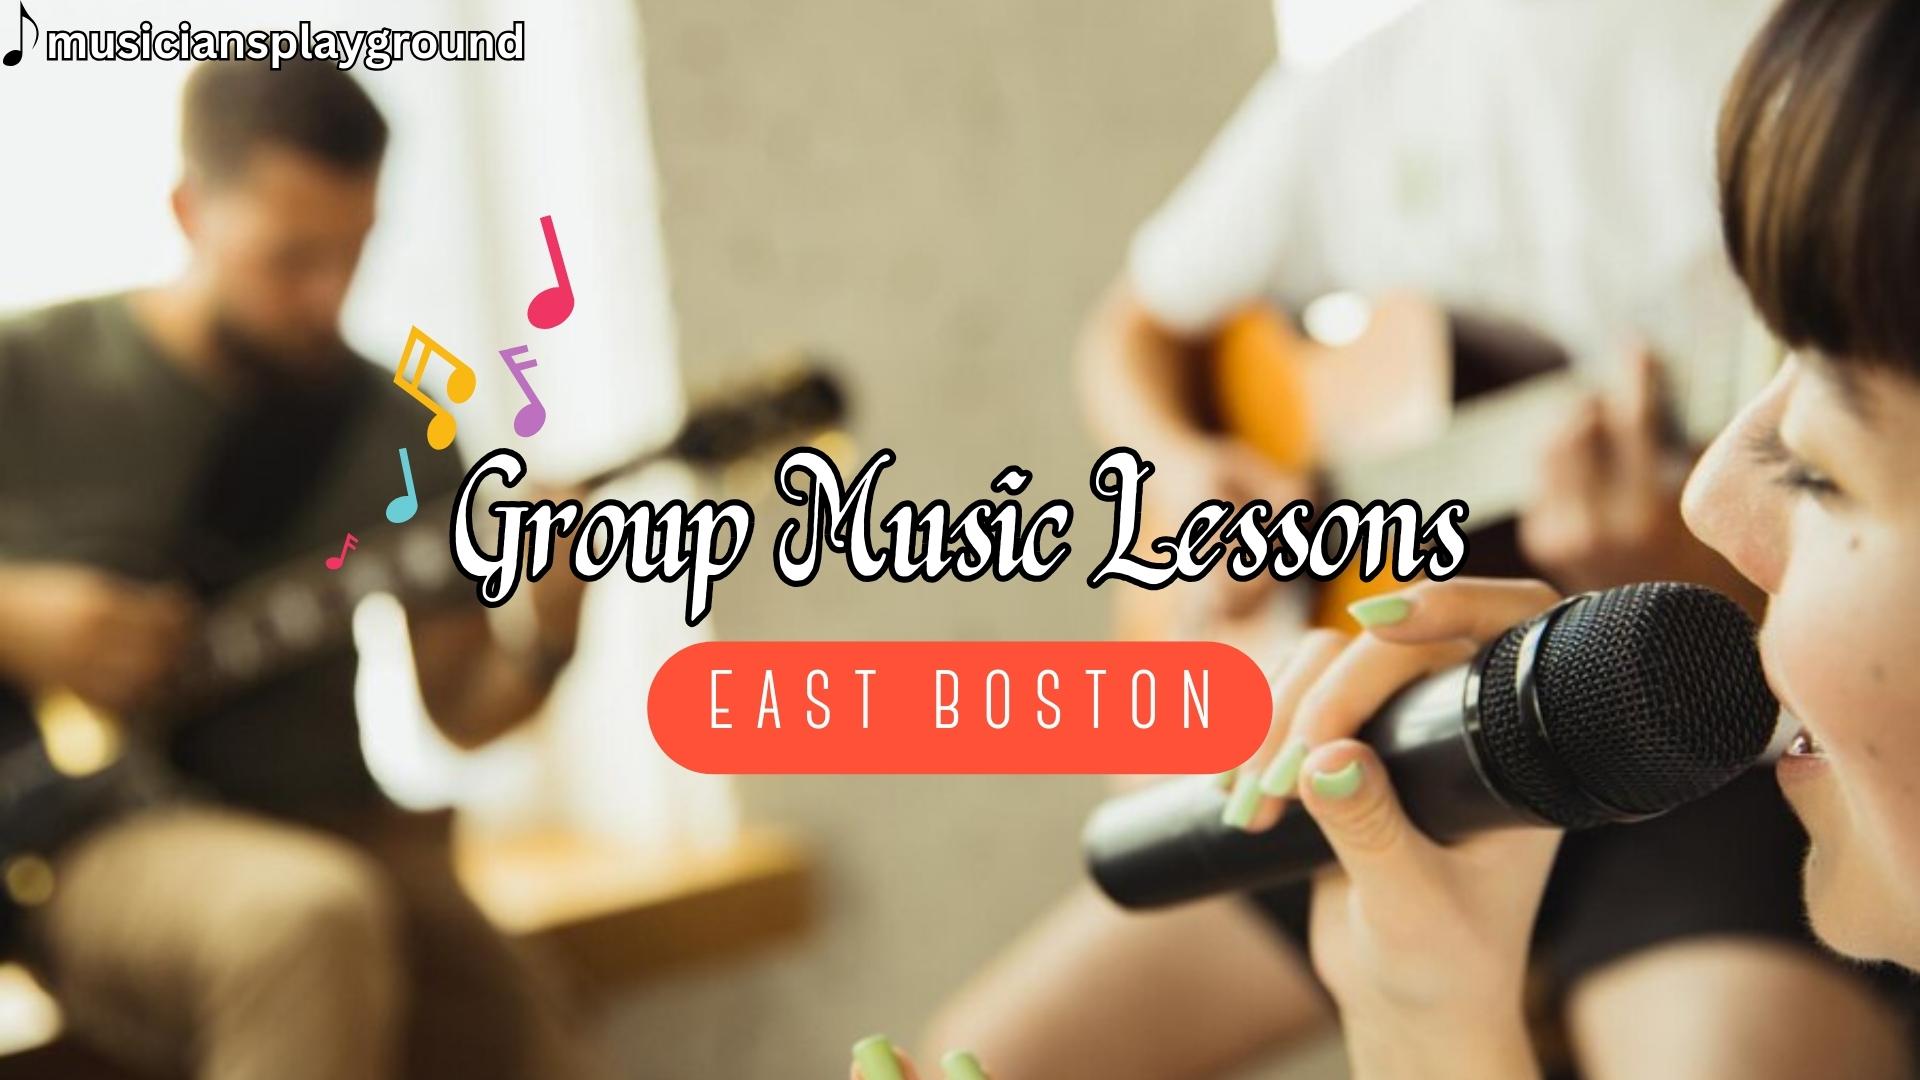 Group Music Lessons in East Boston, Massachusetts: Collaborative Music Learning at Musicians Playground